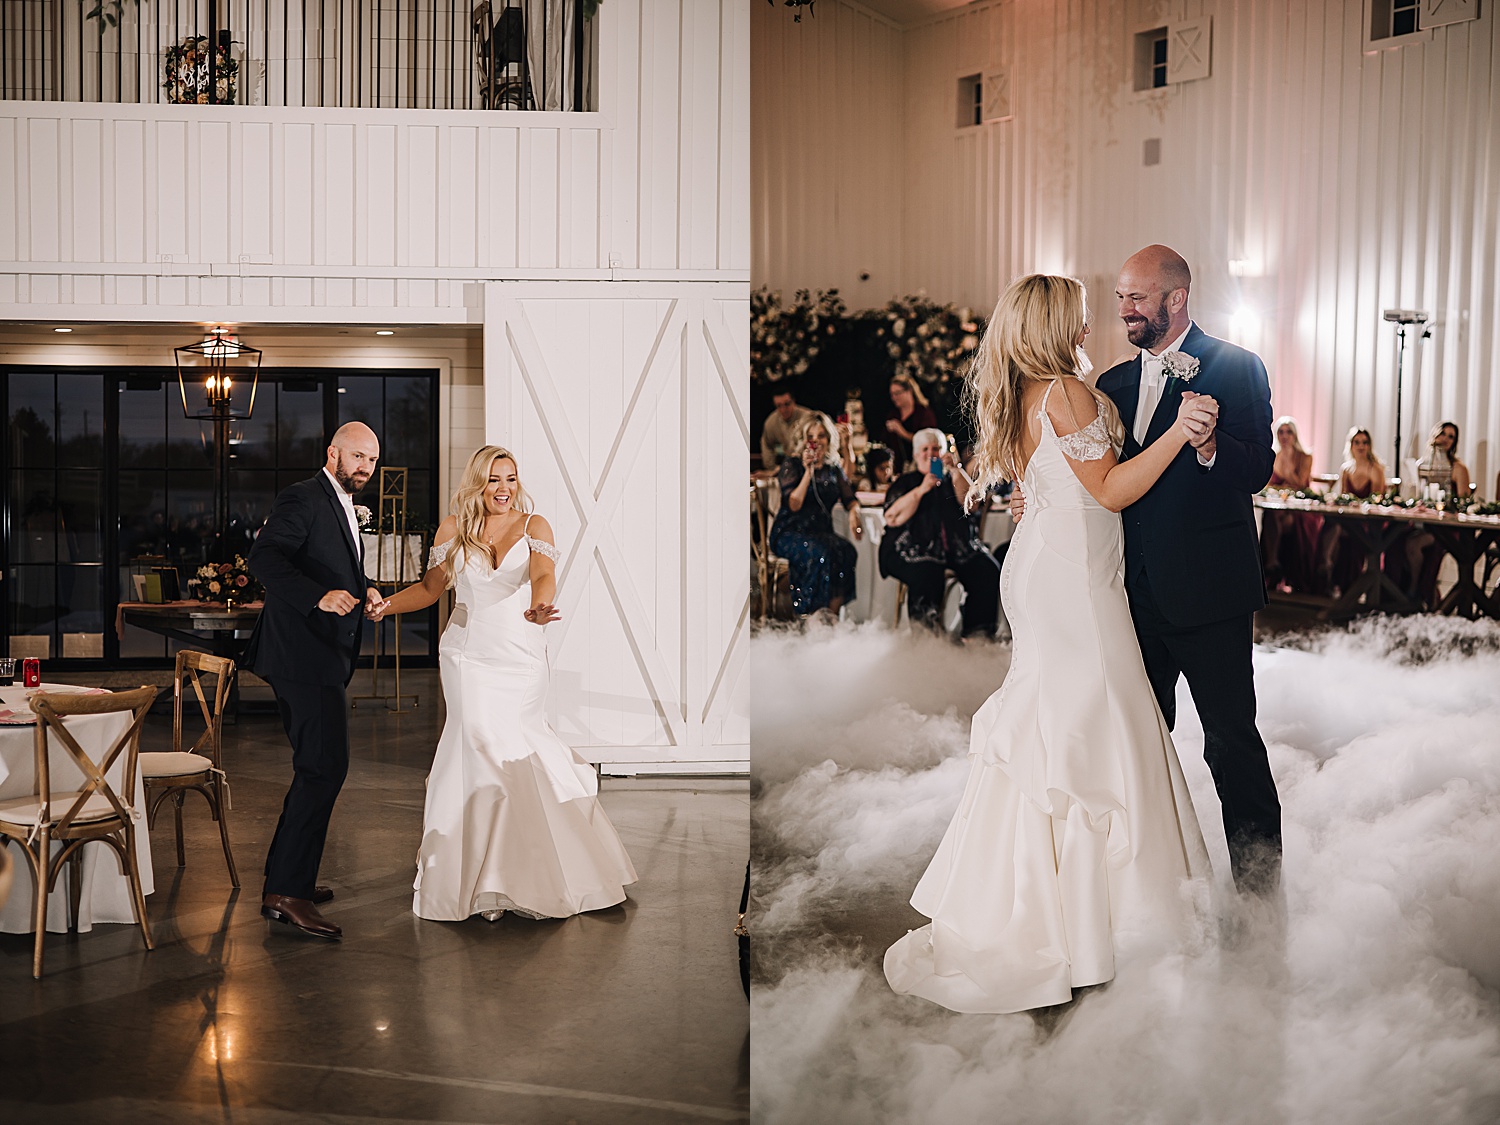 Bride and groom have grand entrance and share first dance with cloud machine